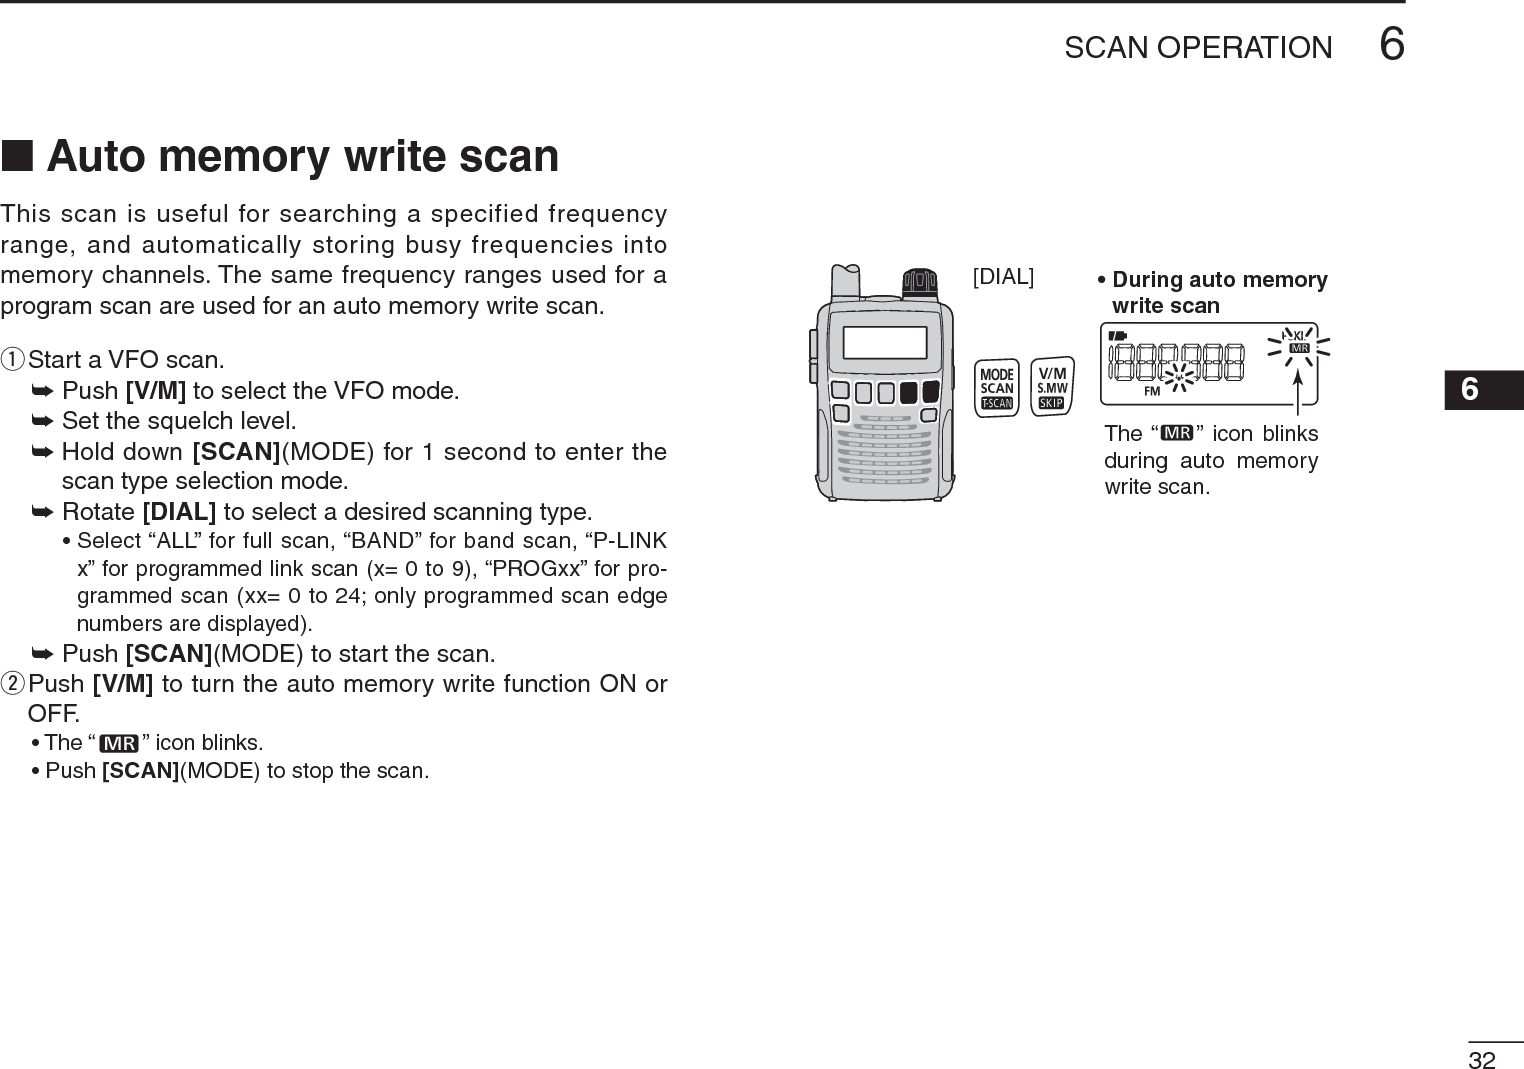 326SCAN OPERATION6N Auto memory write scanThis scan is useful for searching a specified frequency range, and automatically storing busy frequencies into memory channels. The same frequency ranges used for a program scan are used for an auto memory write scan.qStart a VFO scan.± Push [V/M] to select the VFO mode.± Set the squelch level.±Hold down [SCAN](MODE) for 1 second to enter the scan type selection mode.± Rotate [DIAL] to select a desired scanning type.• Select “ALL” for full scan, “BAND” for band scan, “P-LINK x” for programmed link scan (x= 0 to 9), “PROGxx” for pro-grammed scan (xx= 0 to 24; only programmed scan edge numbers are displayed).± Push [SCAN](MODE) to start the scan.w  Push [V/M] to turn the auto memory write function ON or OFF.• The “ ” icon blinks.• Push [SCAN](MODE) to stop the scan.[DIAL] • During auto memory write scanThe “    ” icon blinksduring auto memorywrite scan.